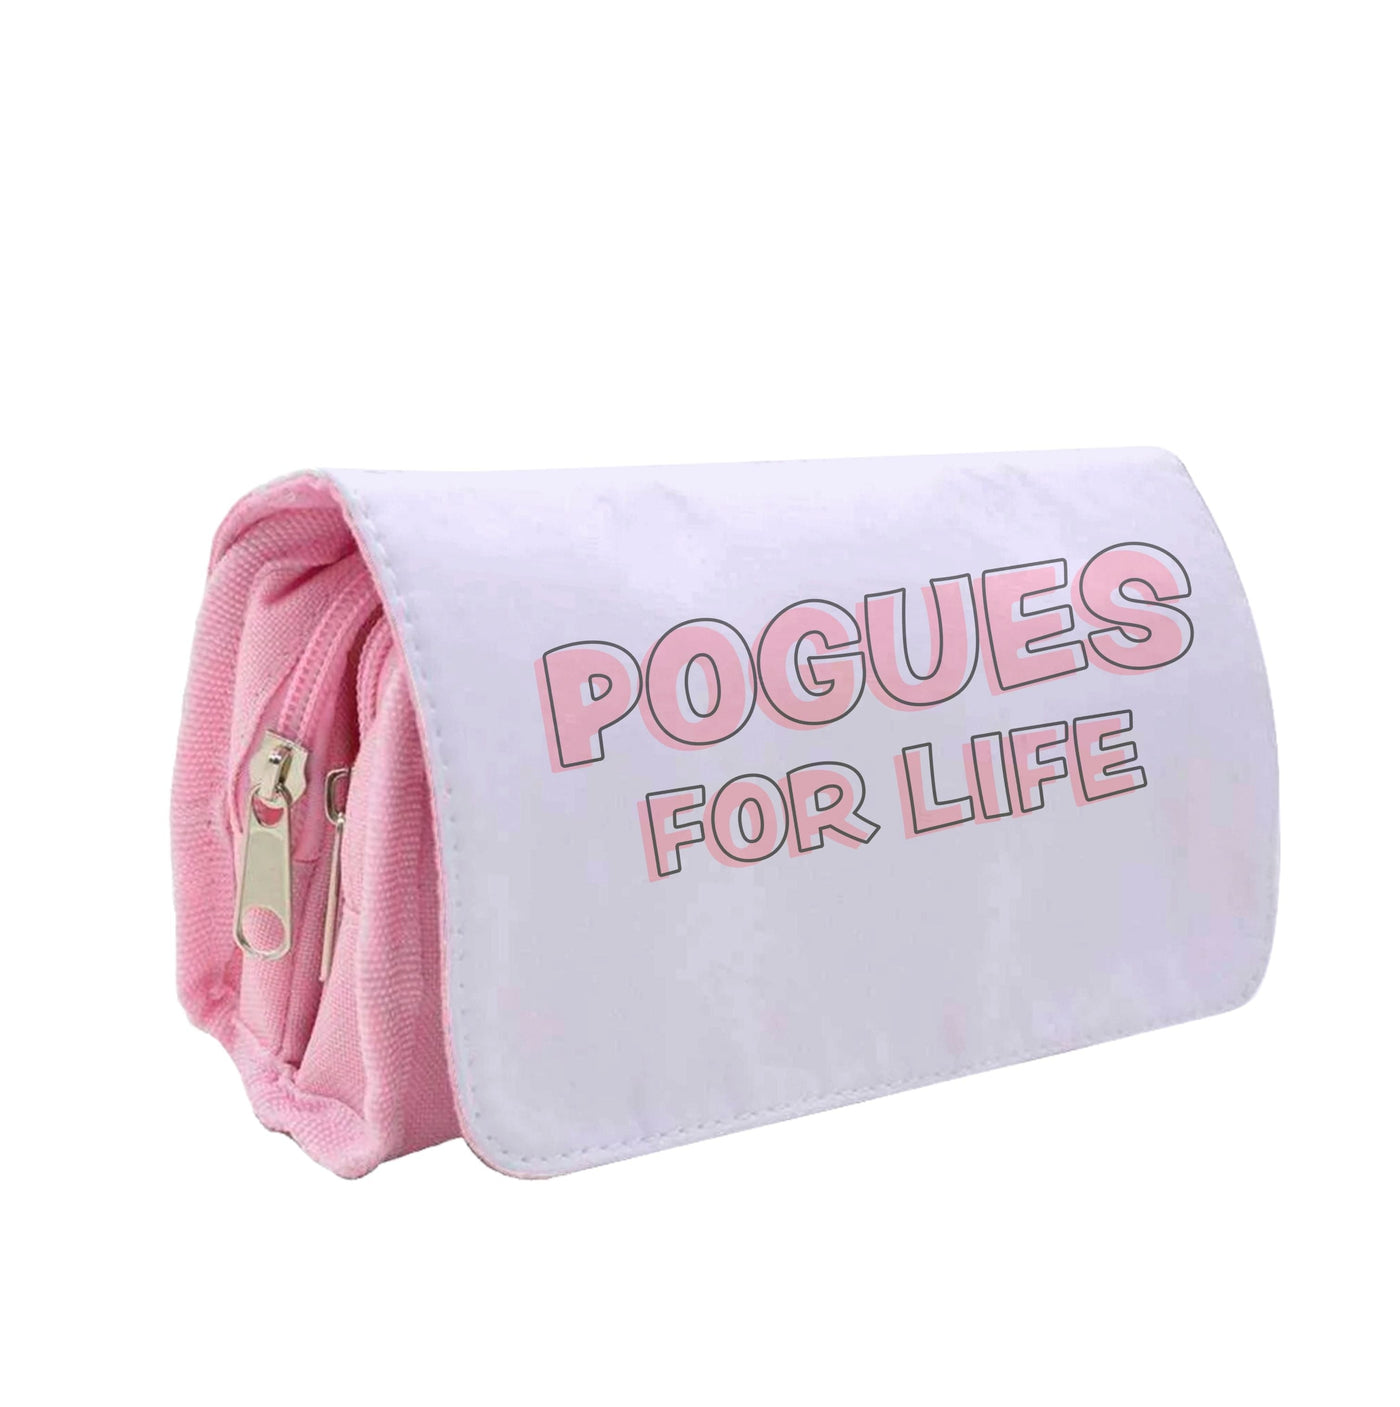 Pogues For Life - Outer Banks Pencil Case